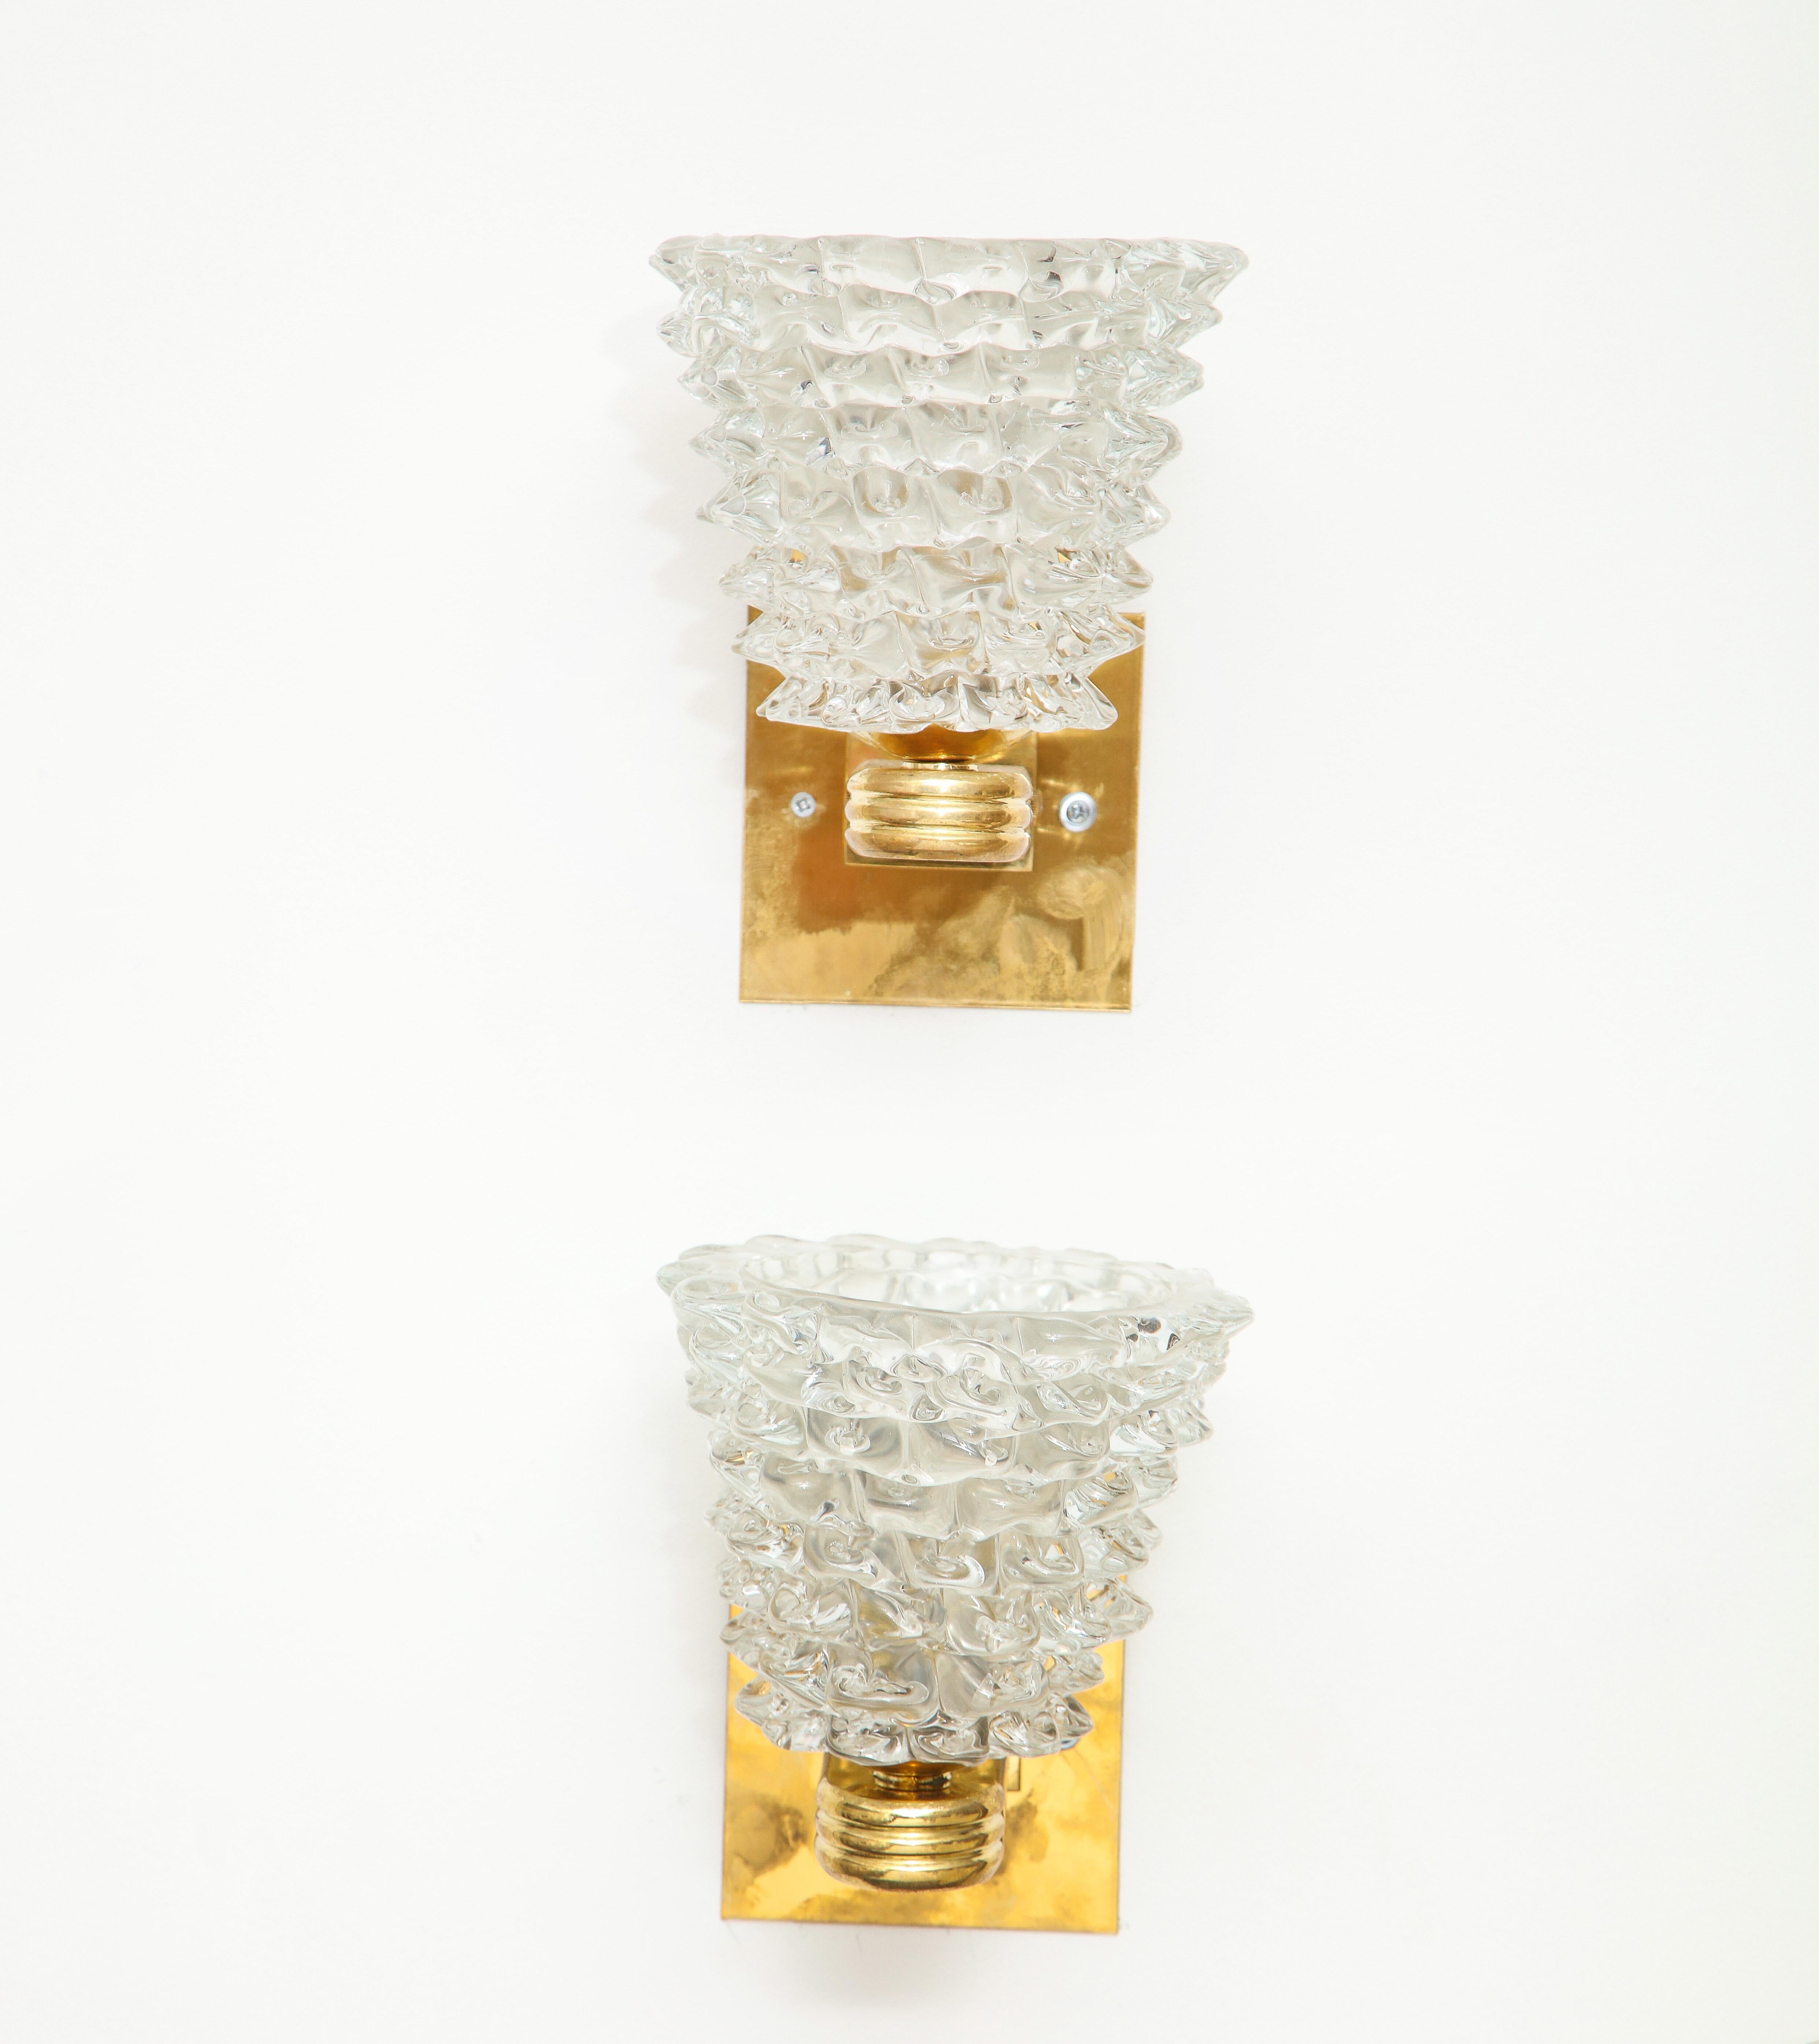 Pair of bespoke murano glass sconces, 21st century.
Please note that the current production time to make
this custom order is 6-8 weeks.
Dimensions: Overall height 9